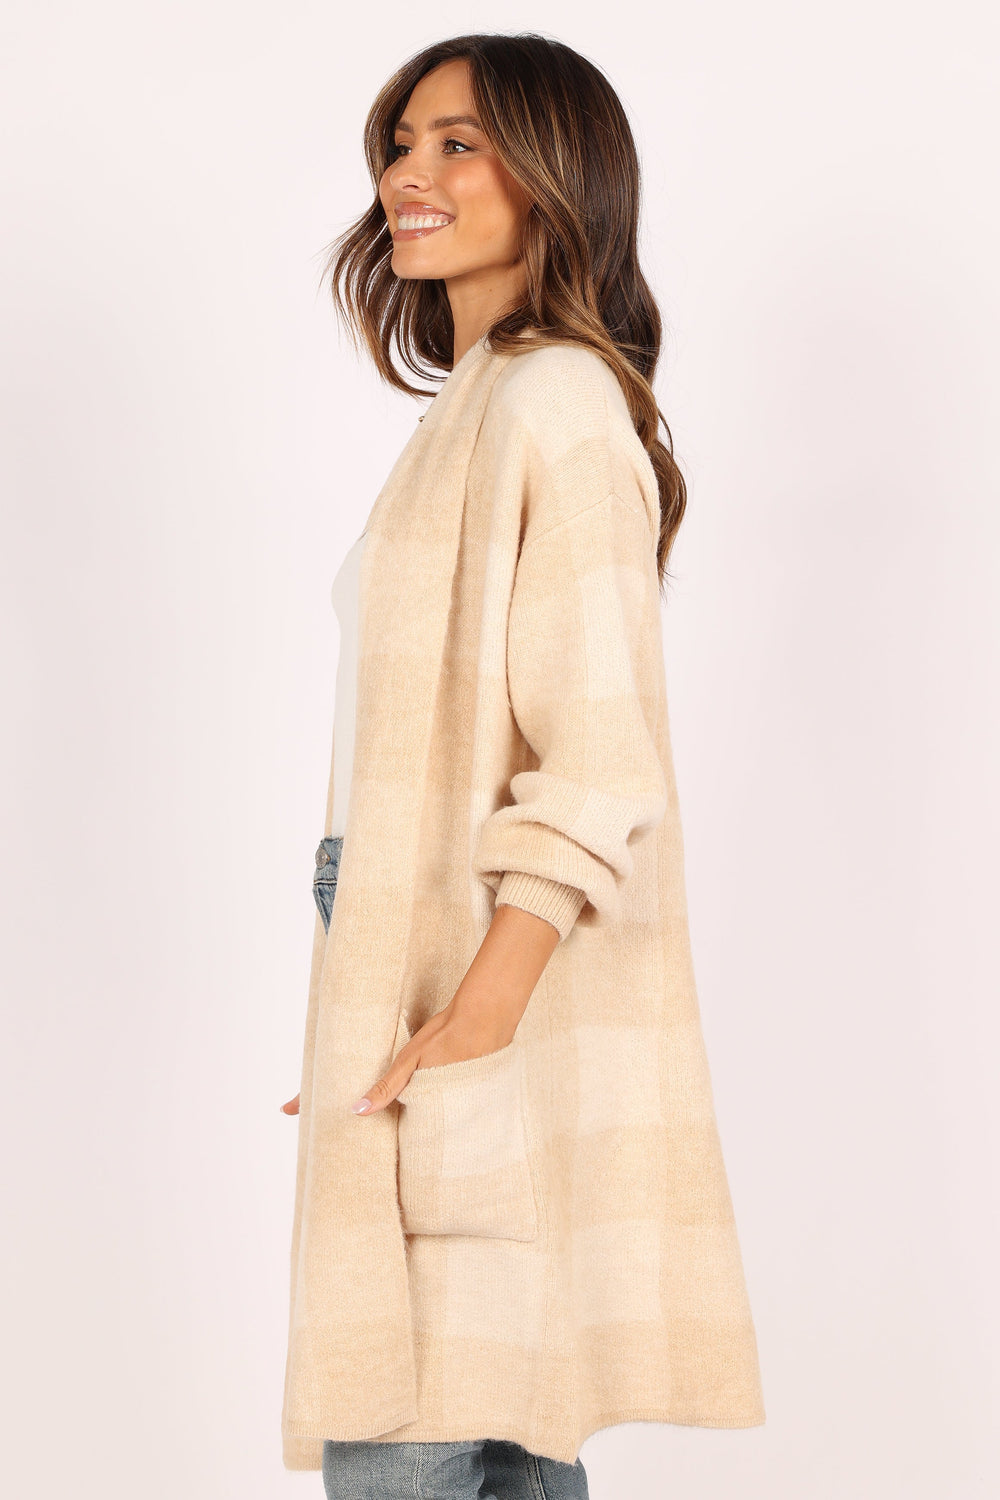 KNITWEAR @Pia Open Front Plaid Cardigan - Taupe